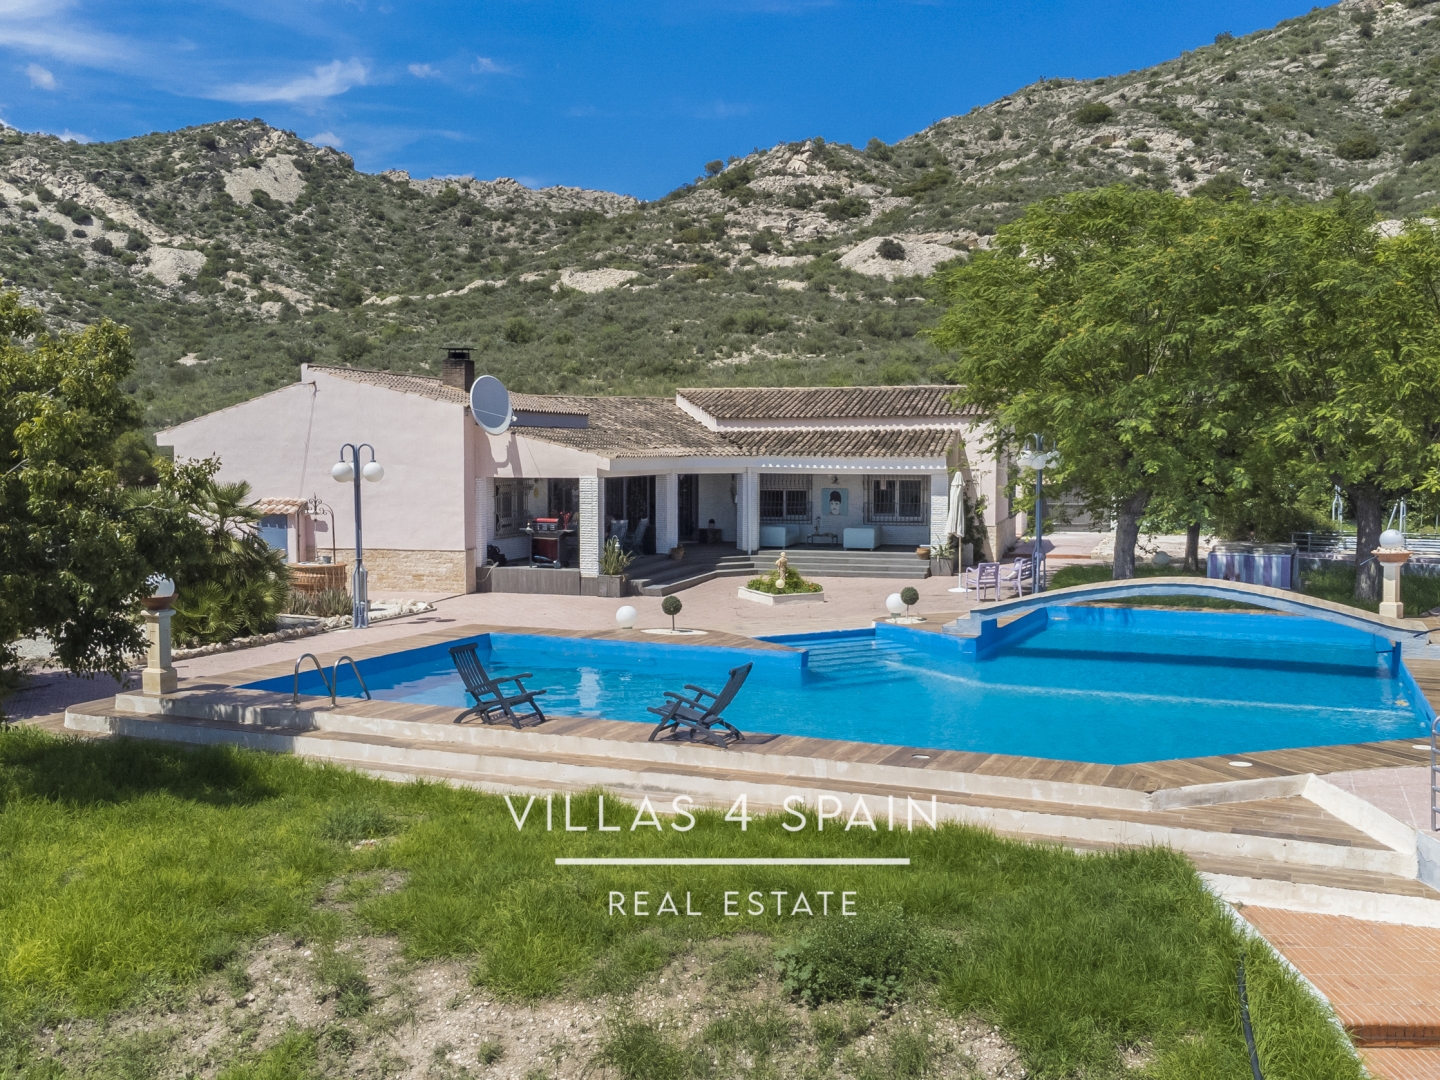 Copy: 5 Bedroom 3 Bathroom Villa in Aspe with private pool and large plot 